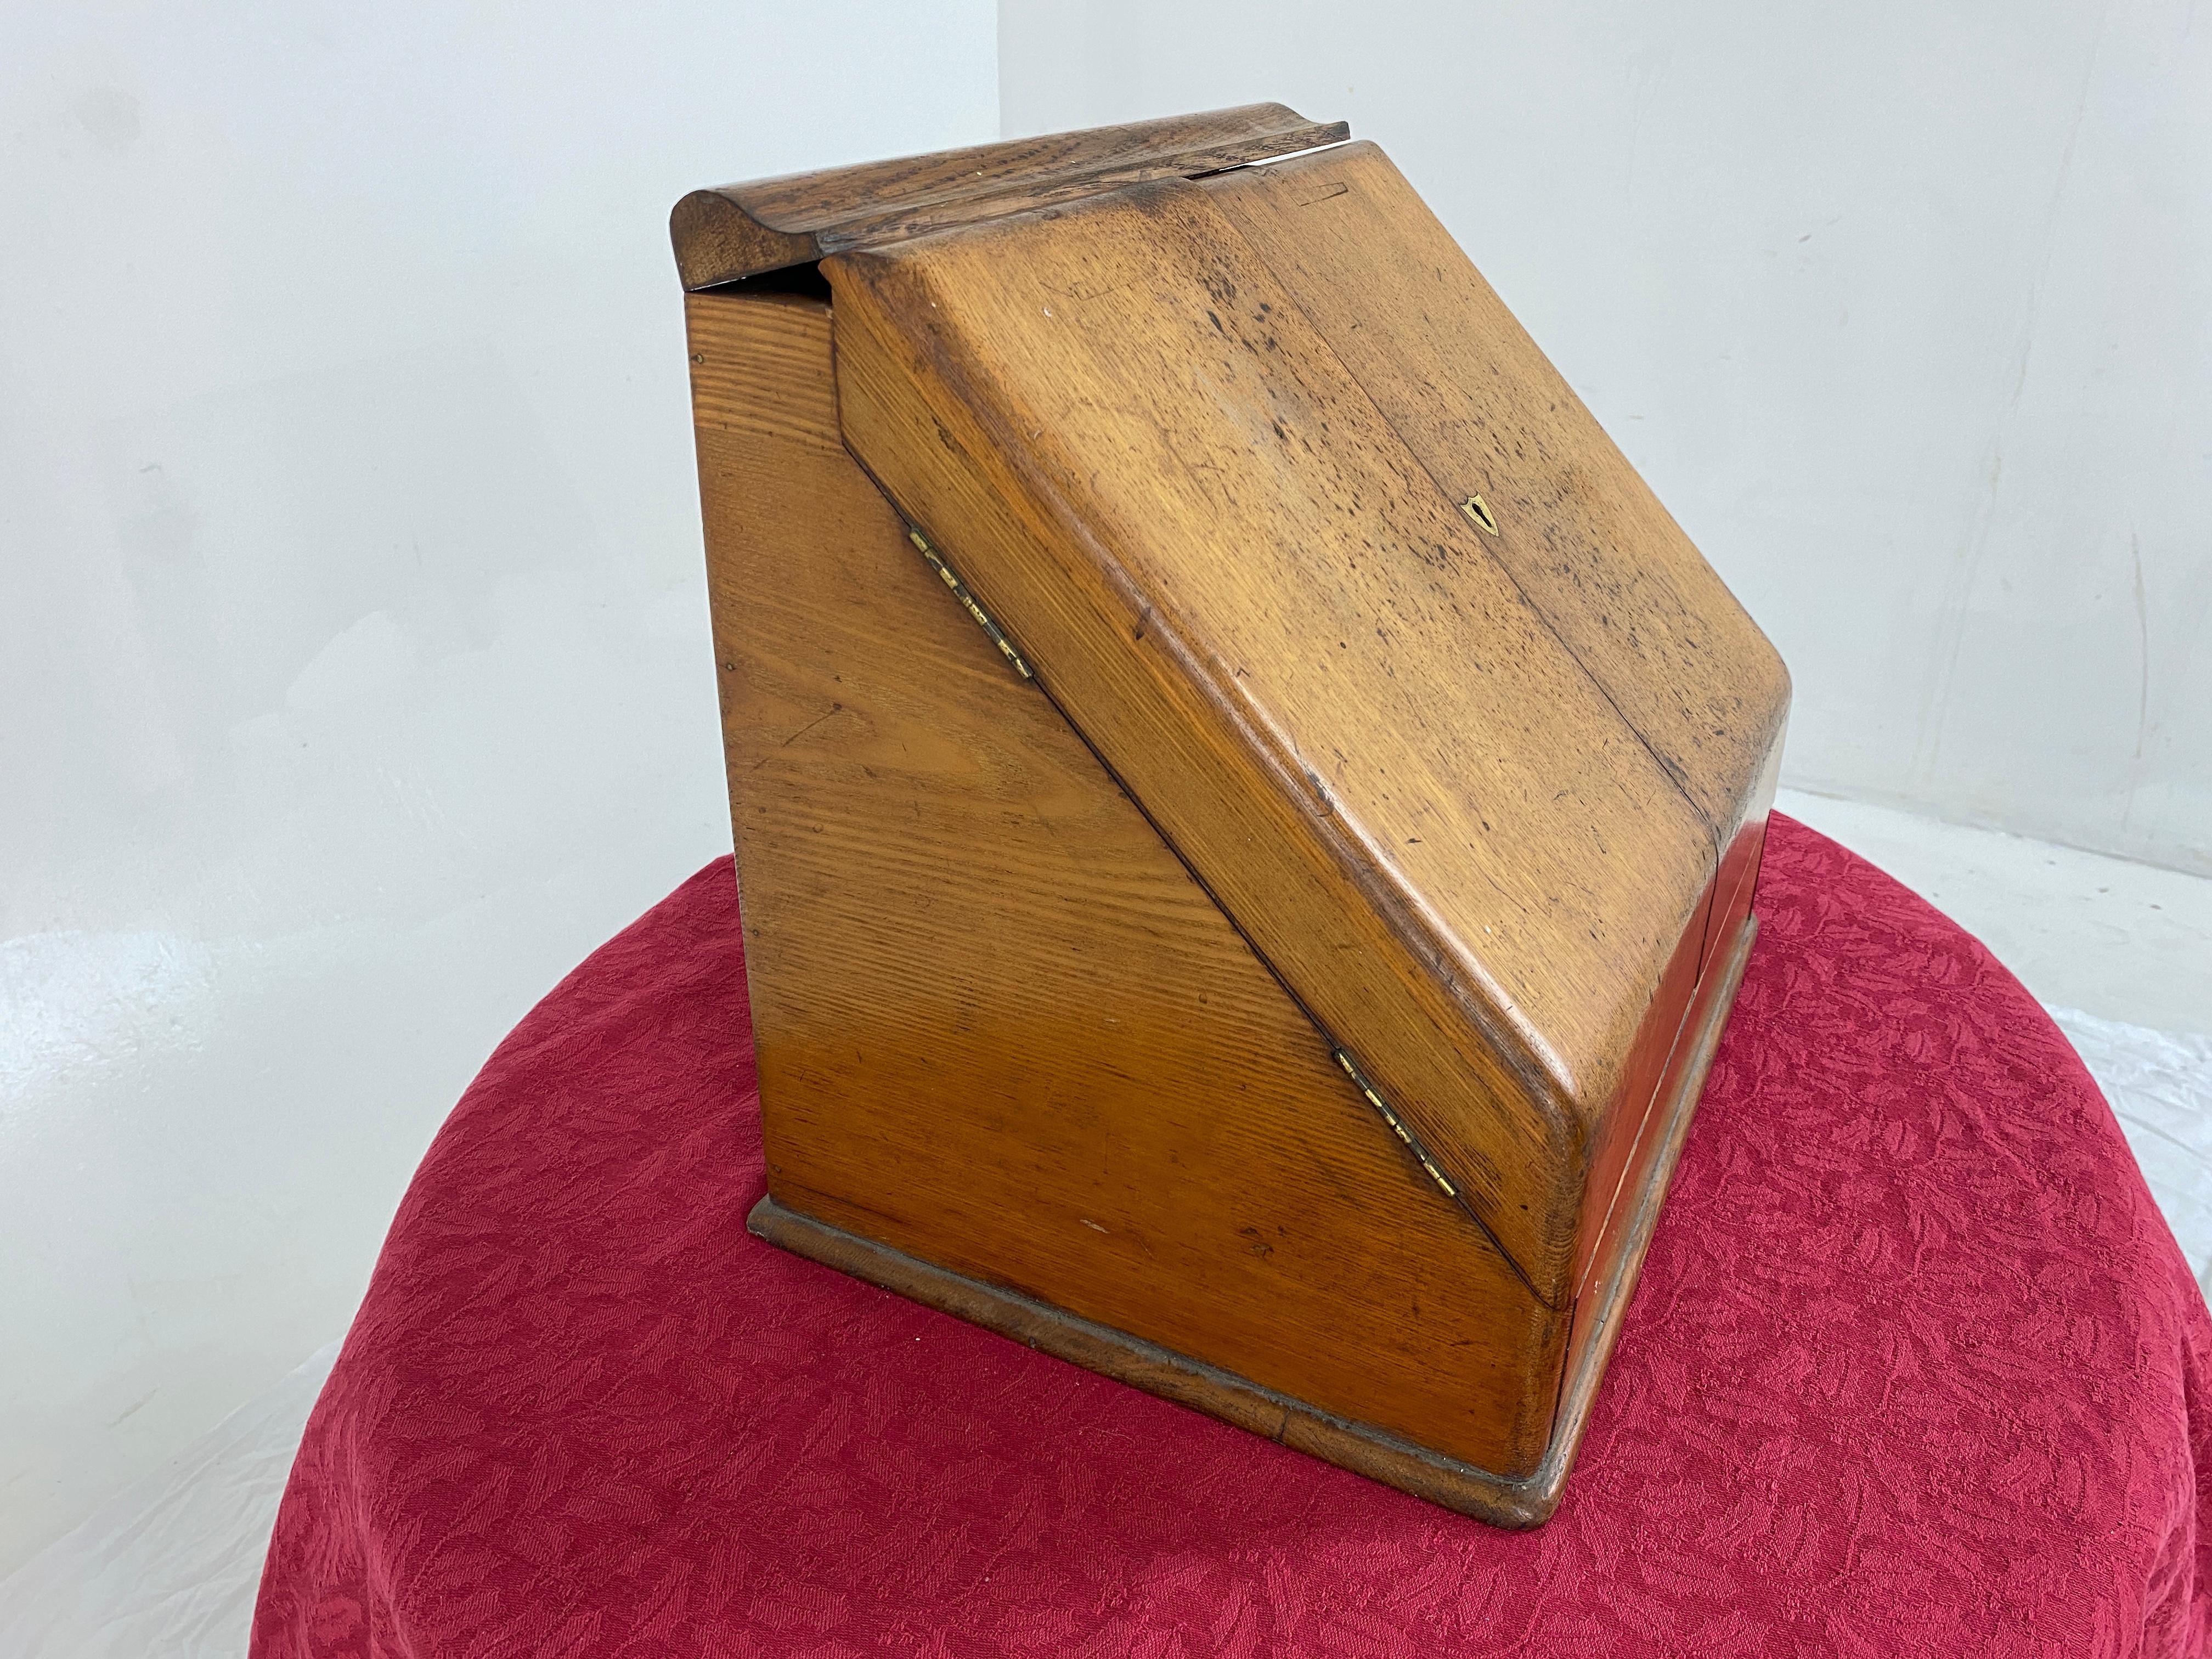 Antique Quality oak stationary box, campaign box, Scotland 1880, H856

Scotland 1880
Solid Oak
Original Finish 
There is a removeable card calendar and stamp box in the top section
The doors on the front open to reveal storage for letters and